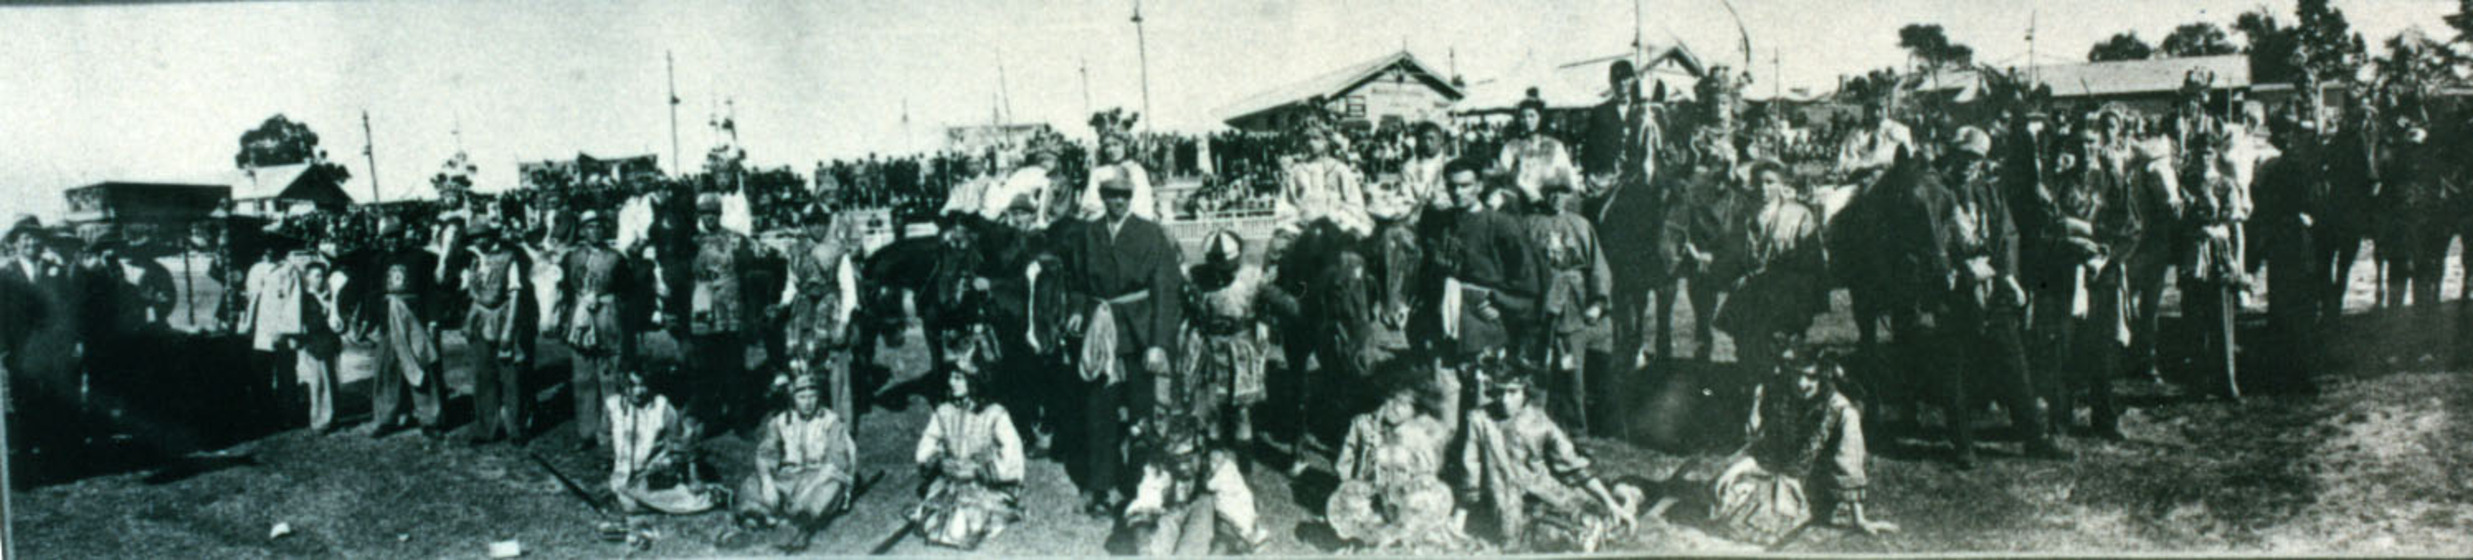 Wide black and white photograph of a row of costumed people, some on horseback.